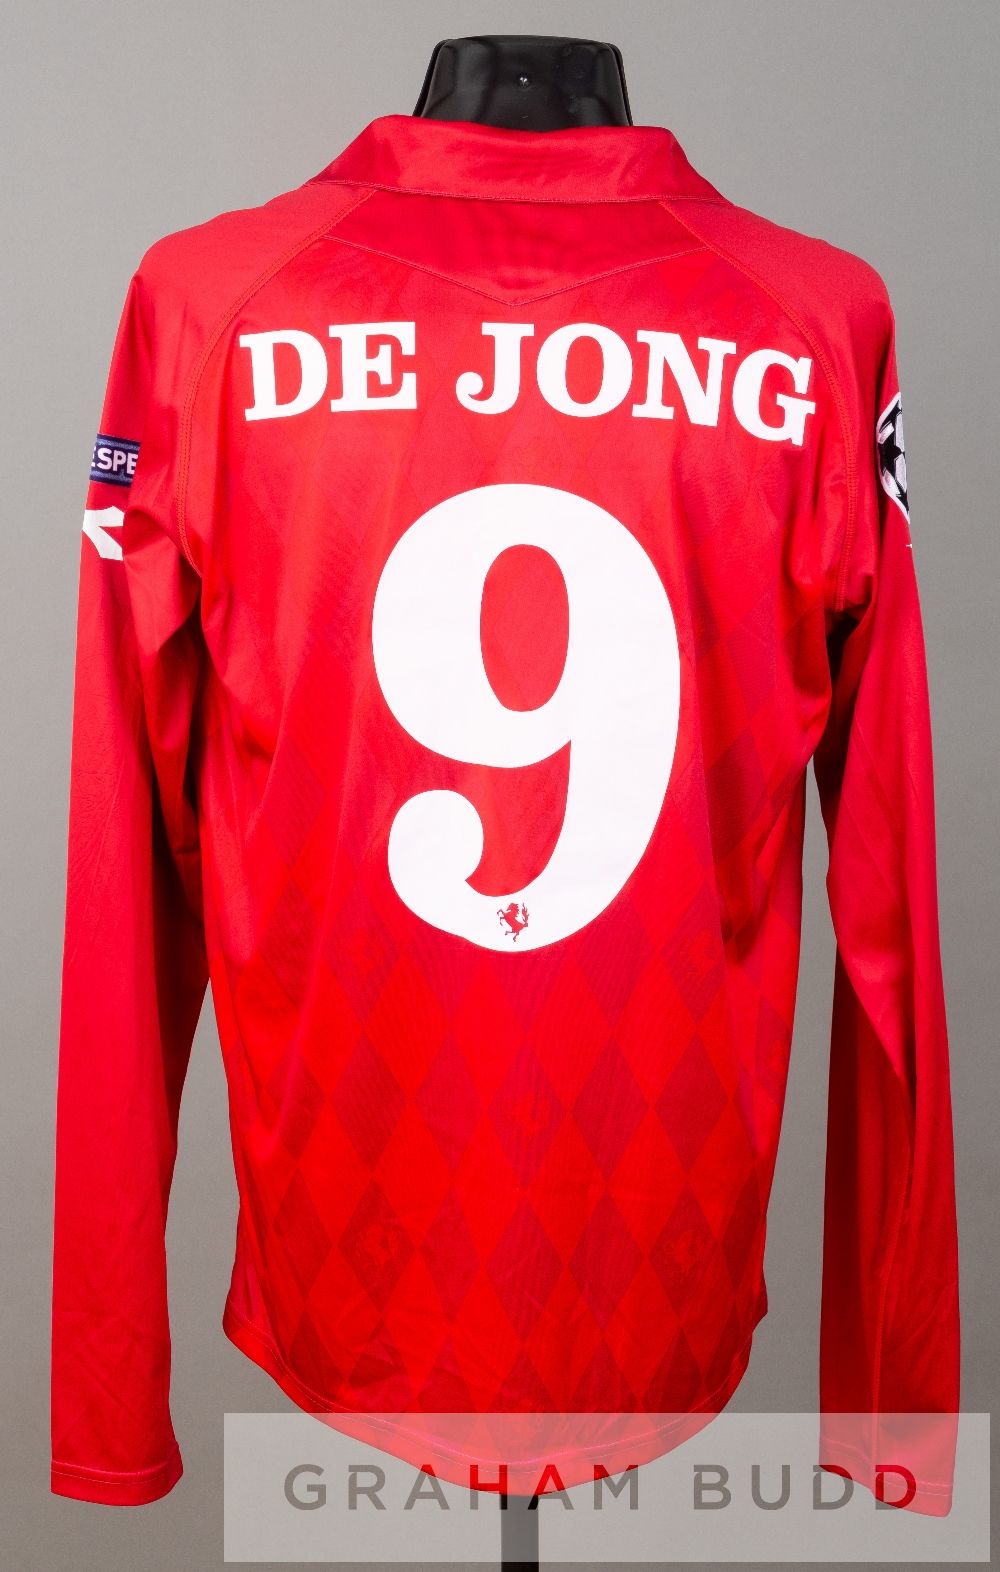 Luuk De Jong red FC Twente no.9 jersey v Tottenham Hotspur in the UEFA Champions League Group A at - Image 2 of 2